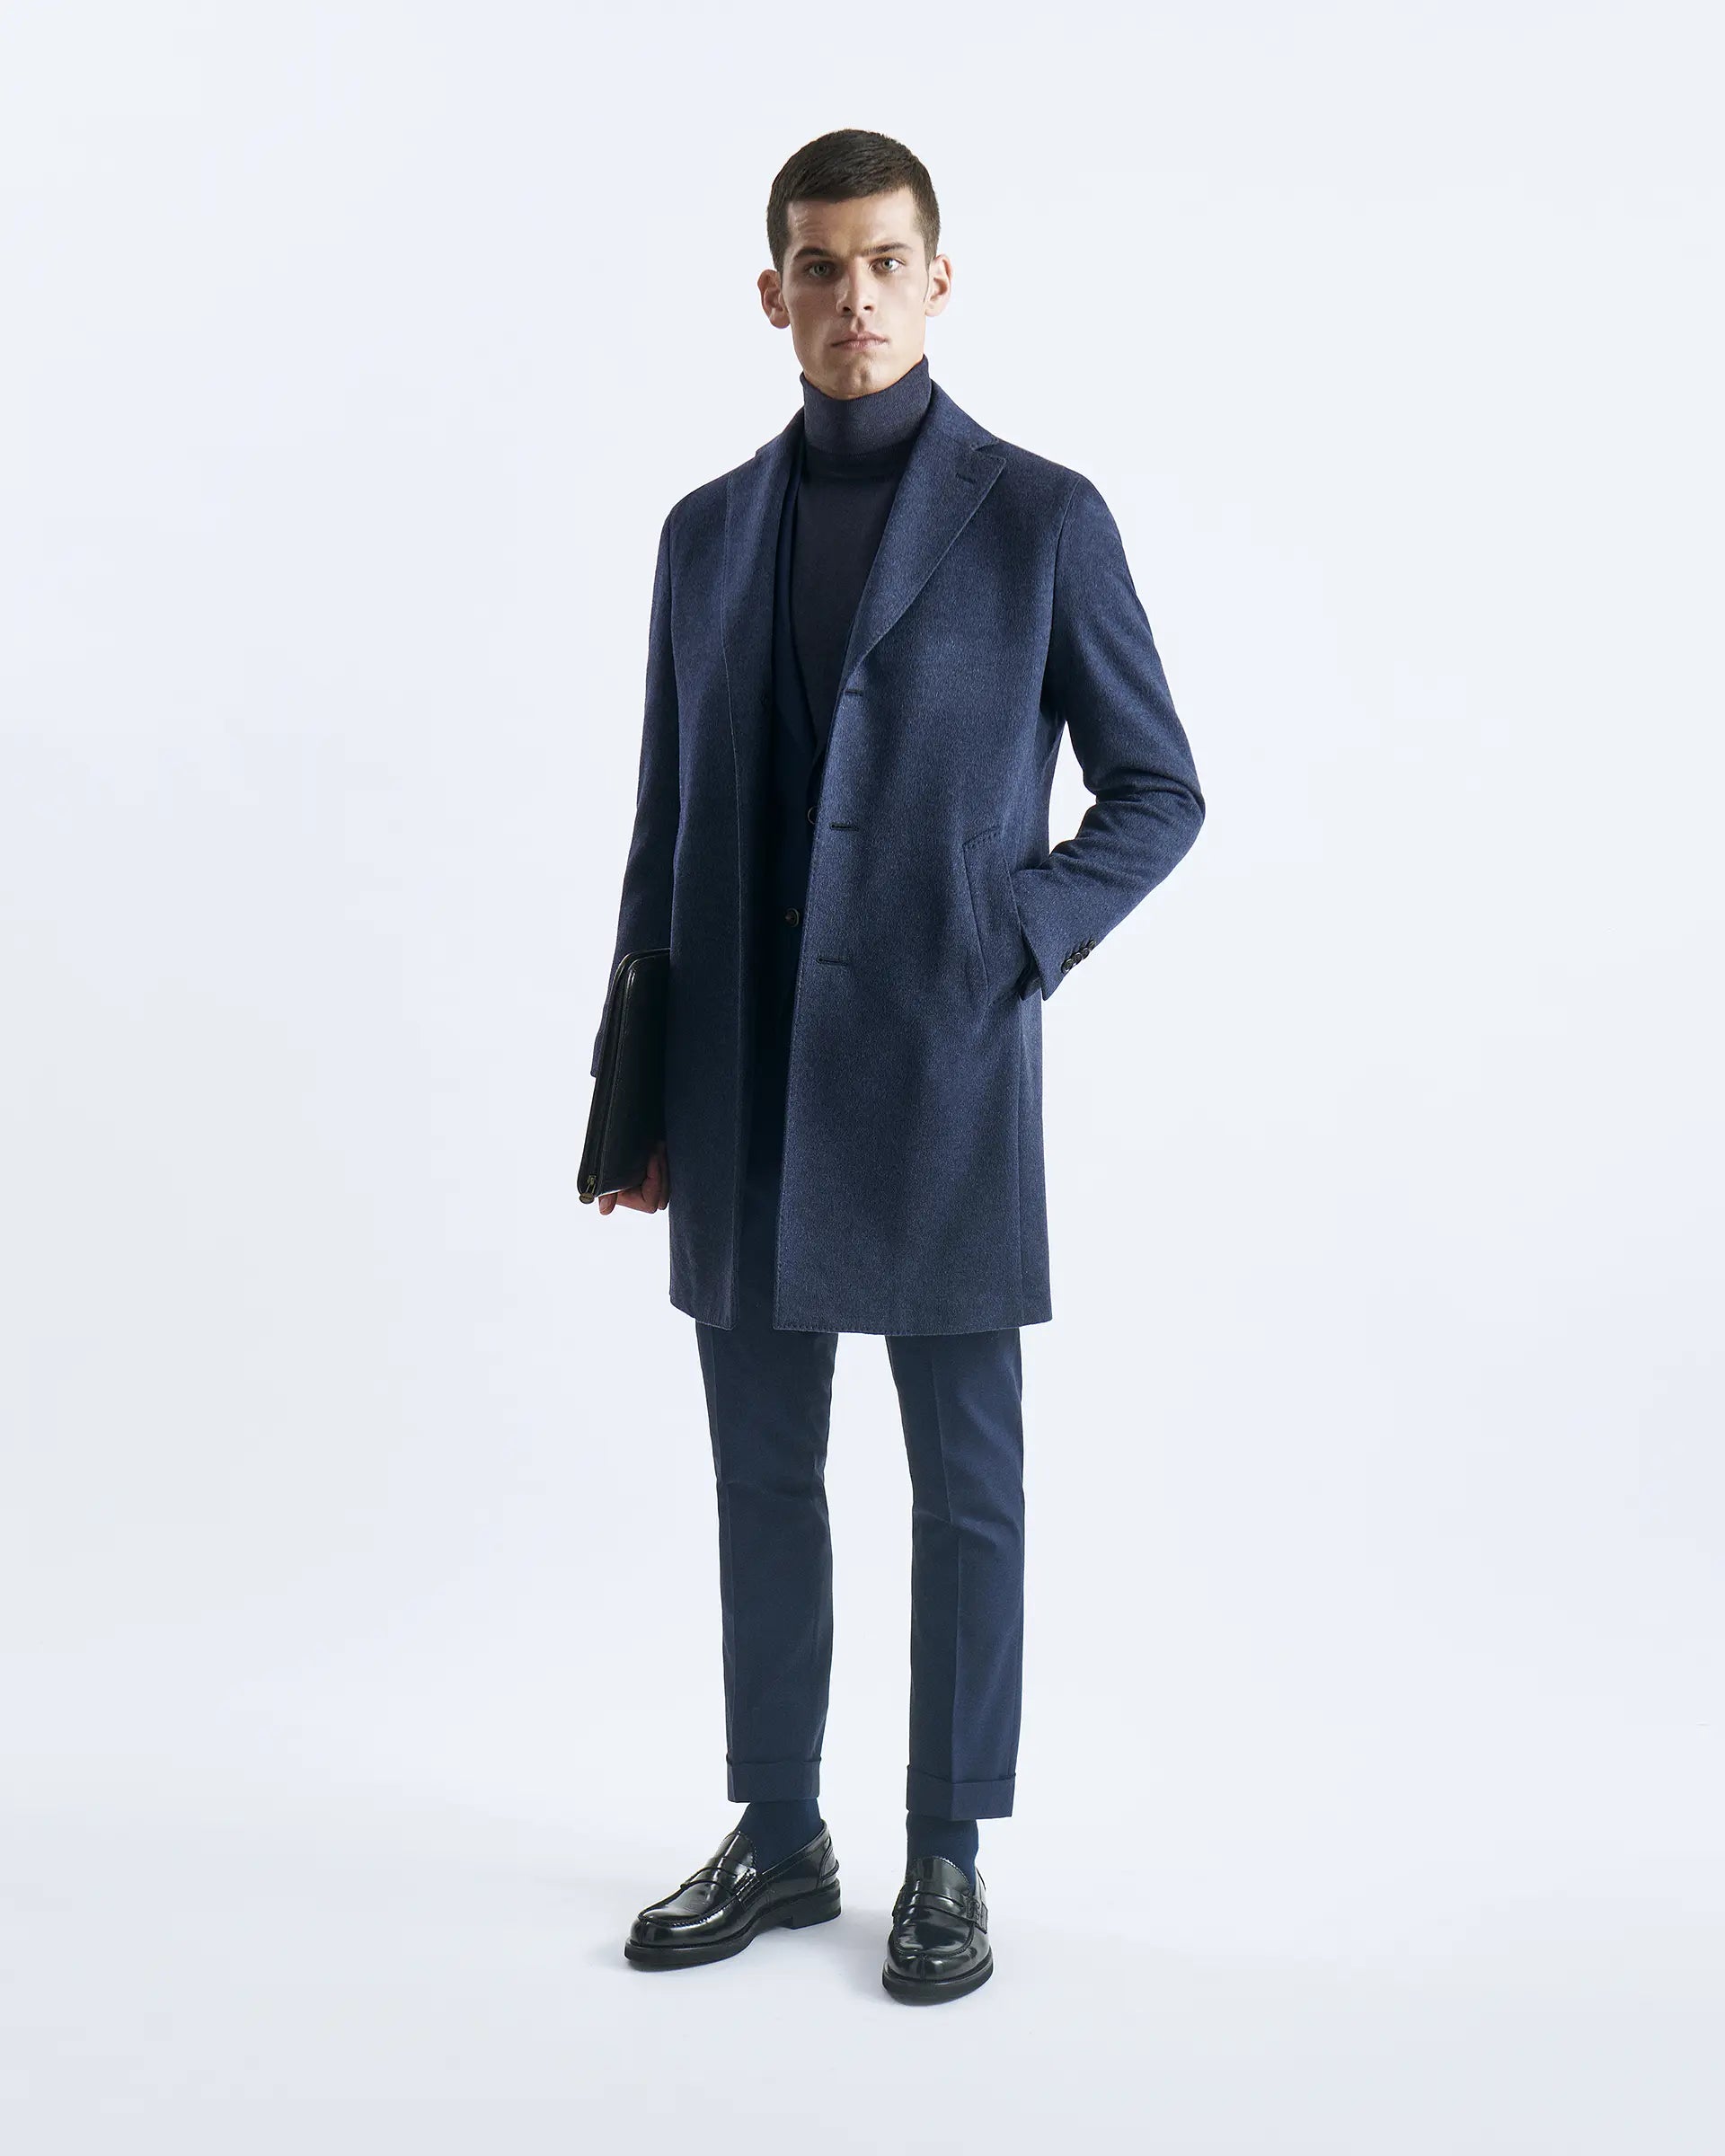 Avion coat in wool and cashmere Lanificio Colombo